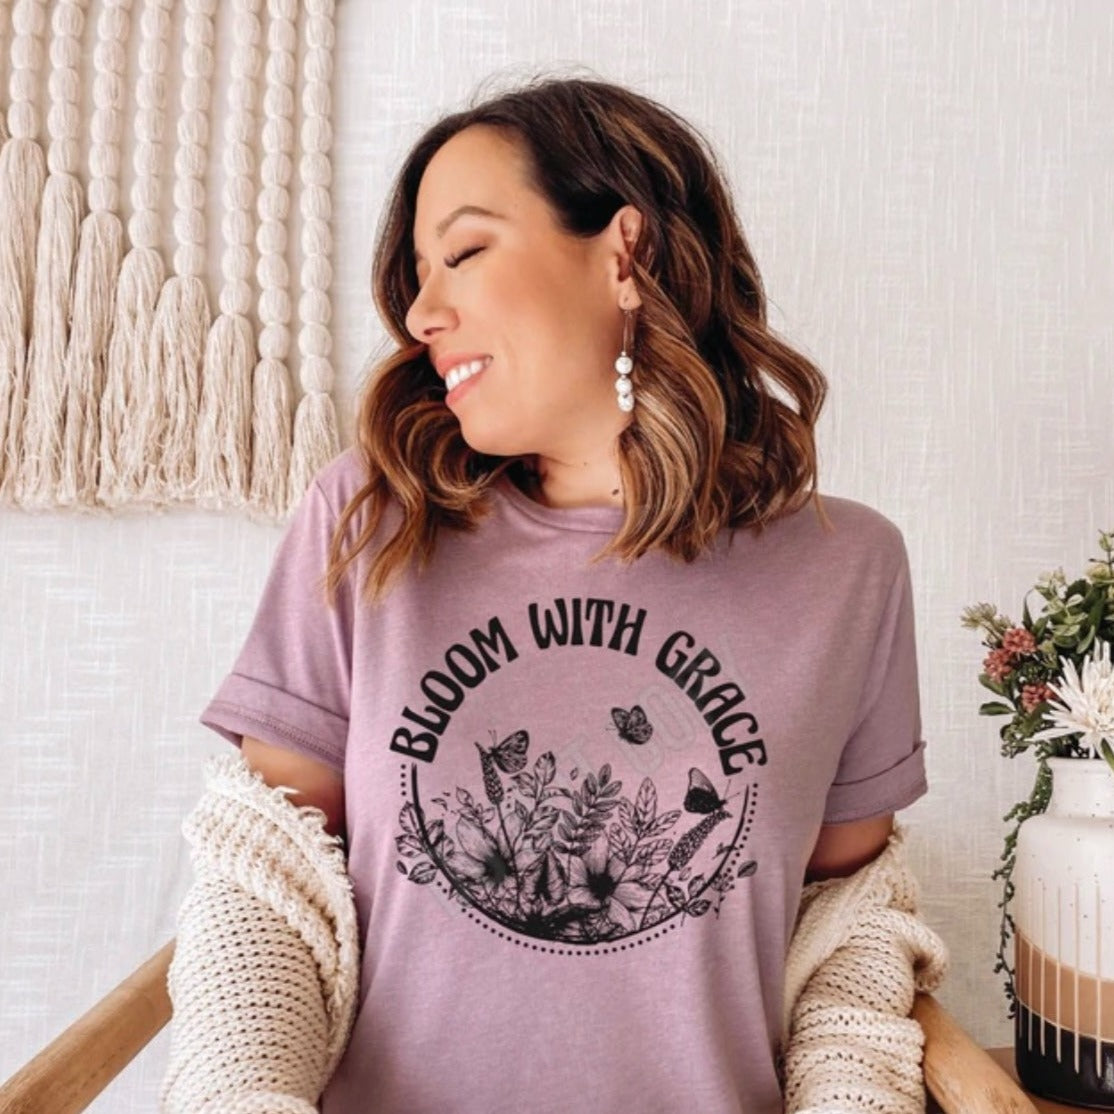 Bloom with Grace Graphic Tee or Sweatshirt - Bella Lia Boutique